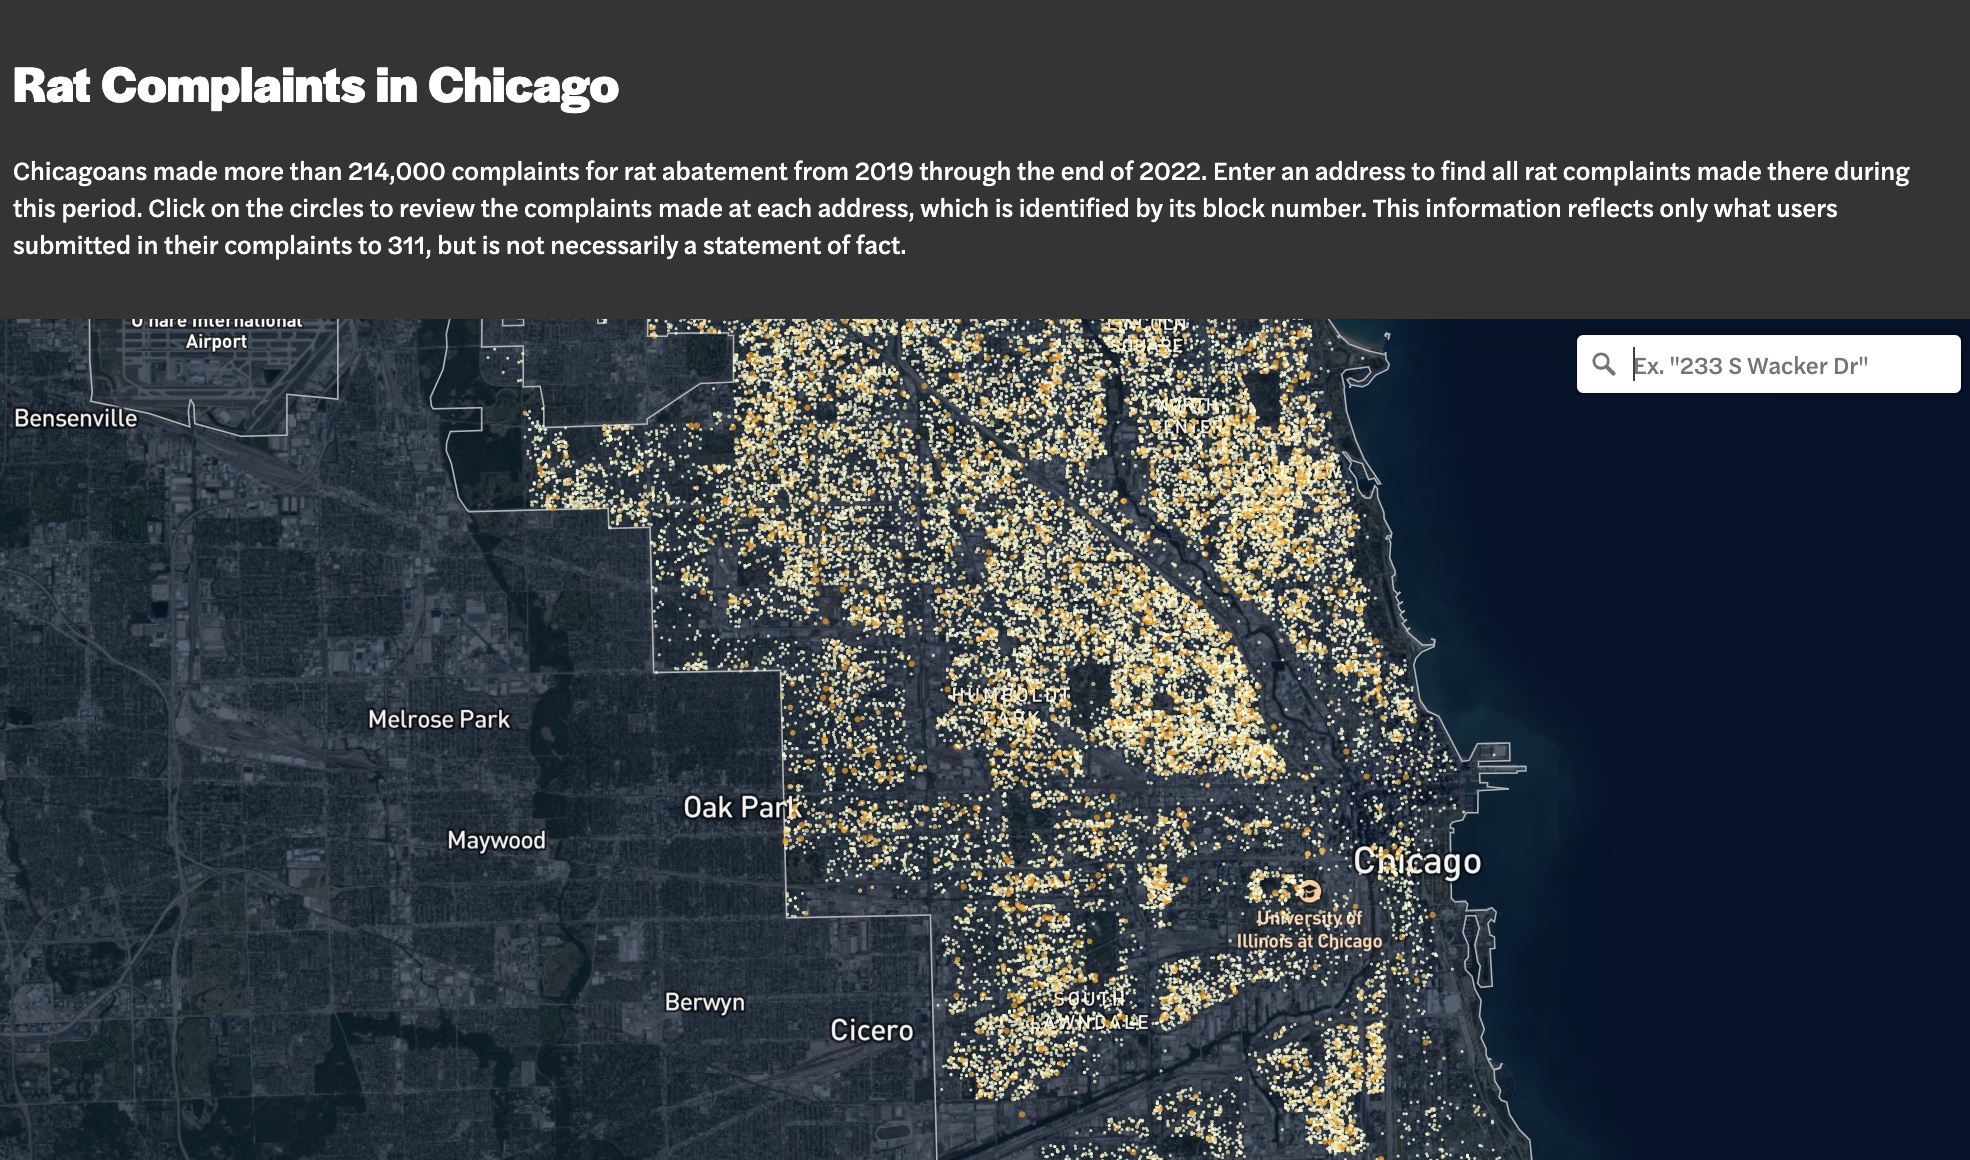 Interactive map showing rat complaints in Chicago.